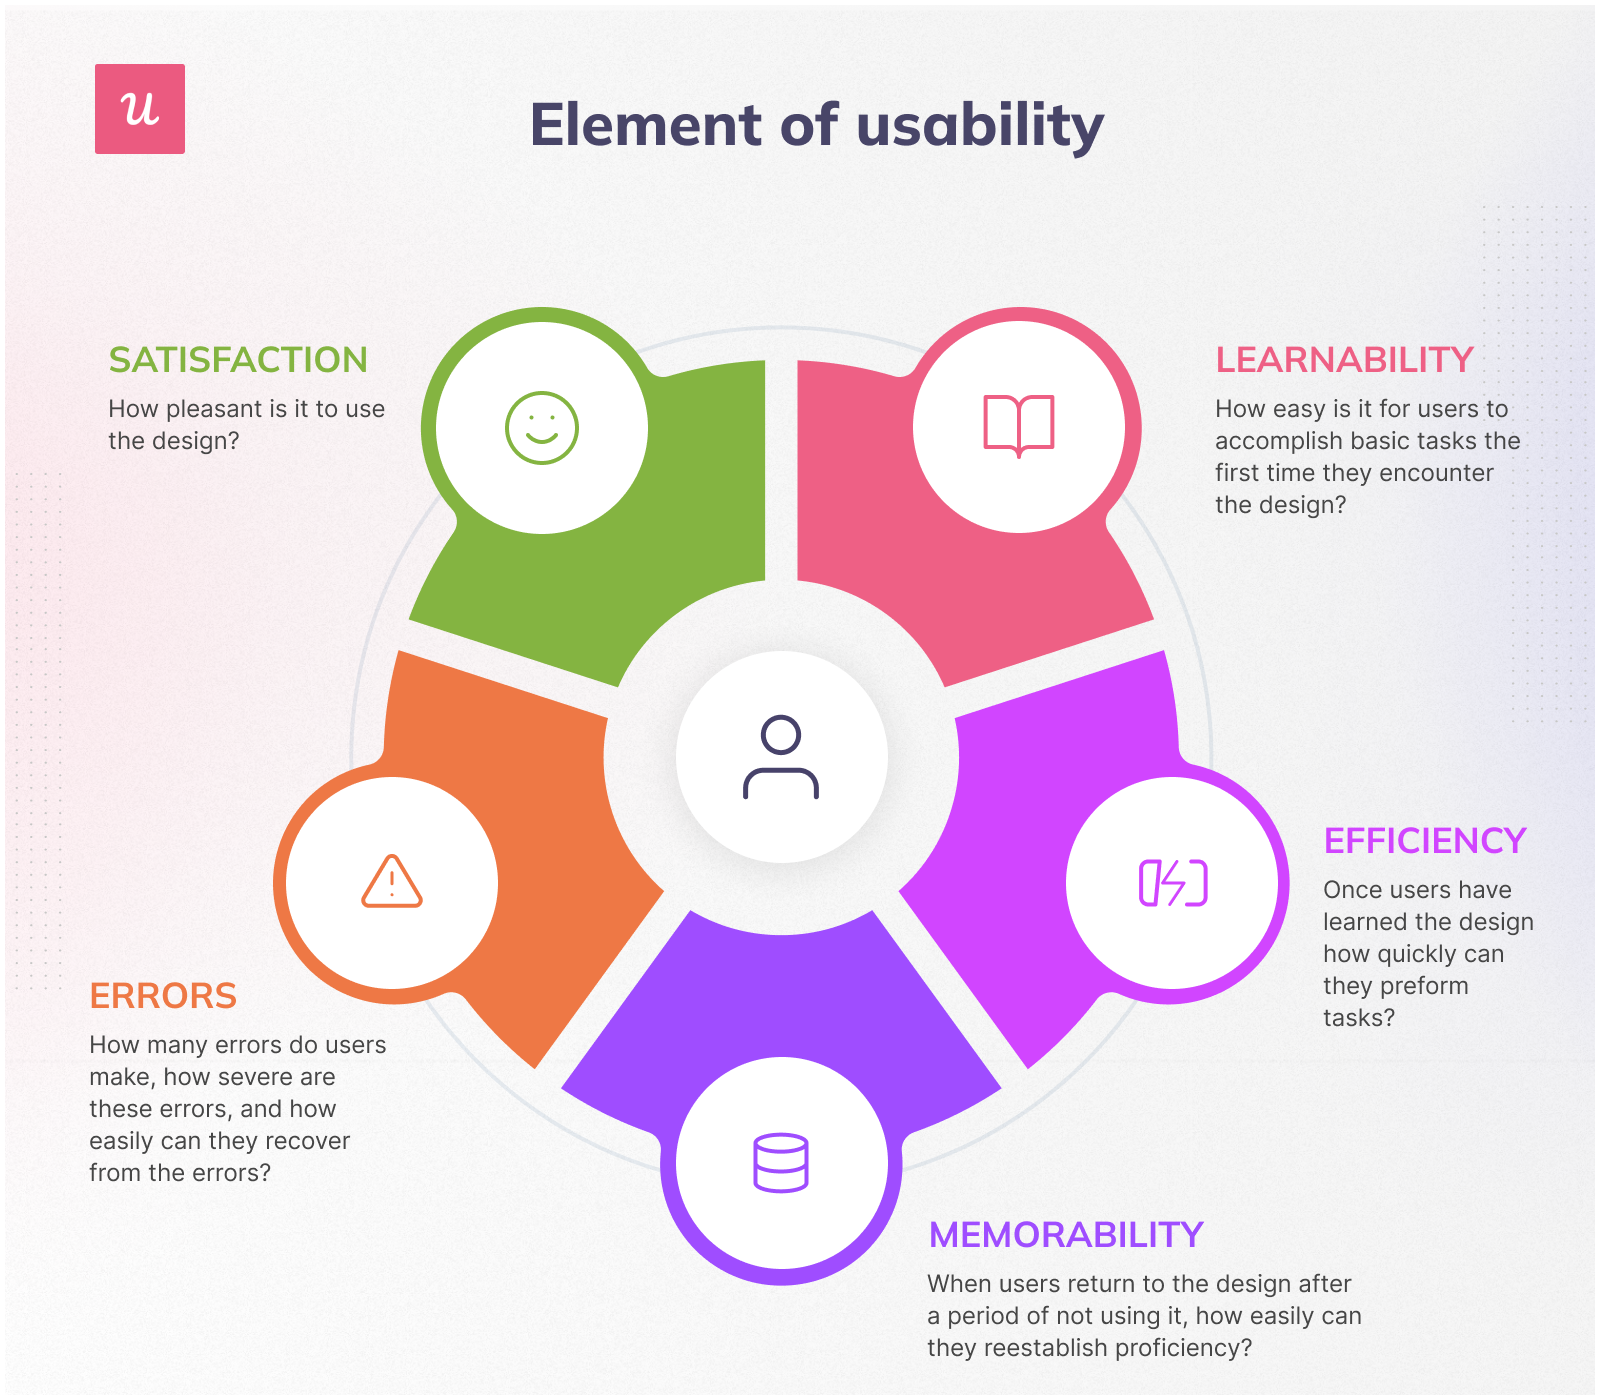 Elements of Usability